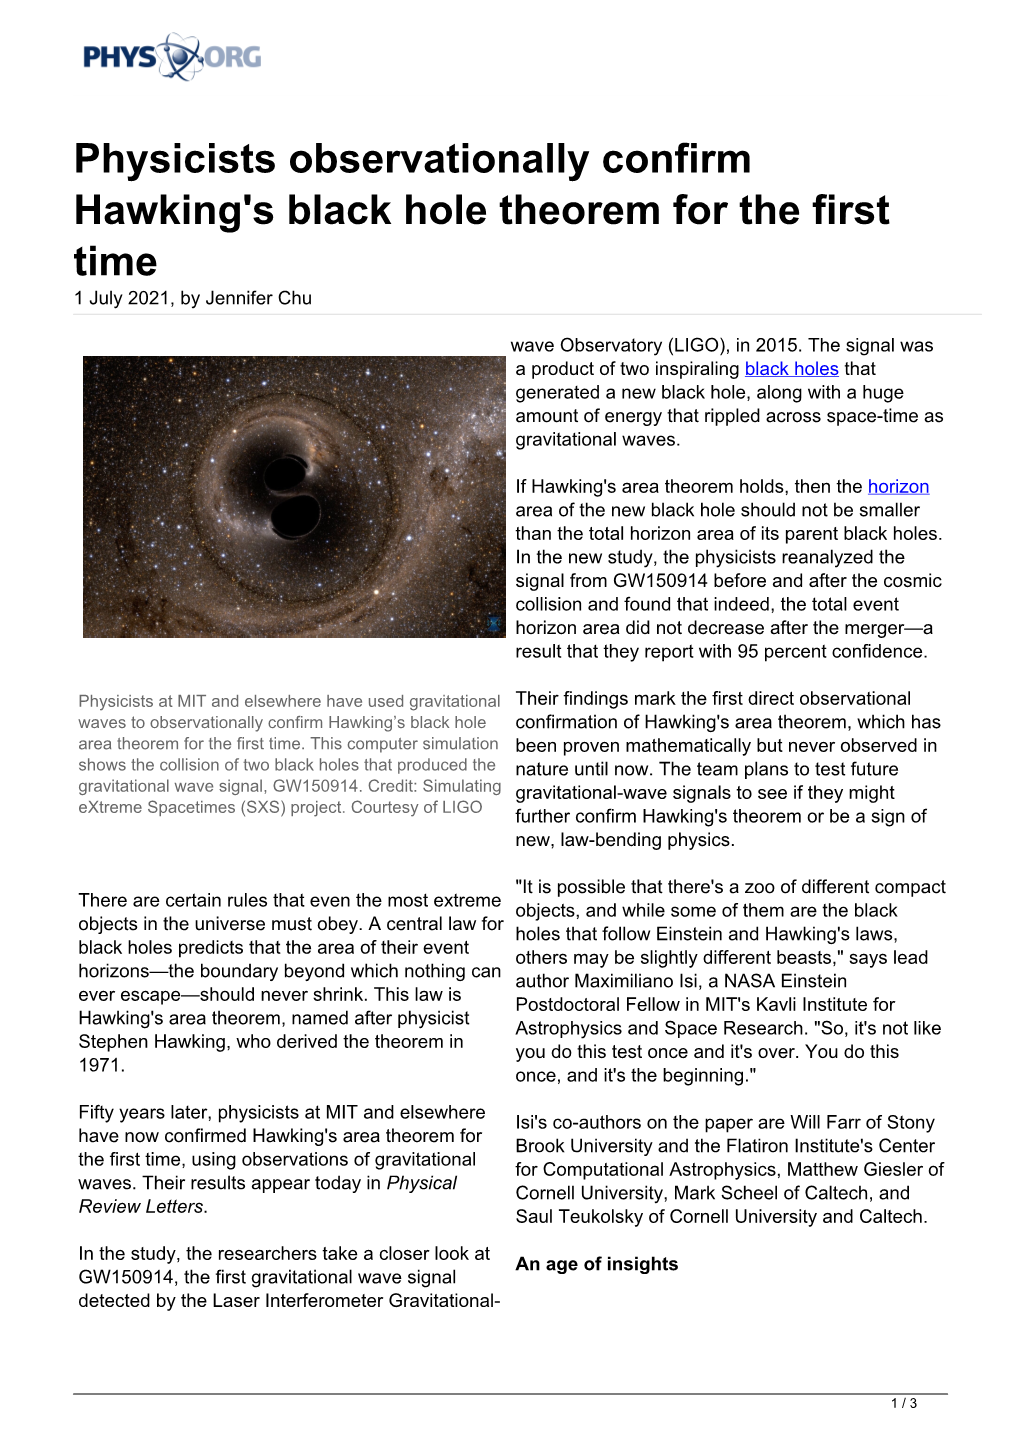 Physicists Observationally Confirm Hawking's Black Hole Theorem for the First Time 1 July 2021, by Jennifer Chu